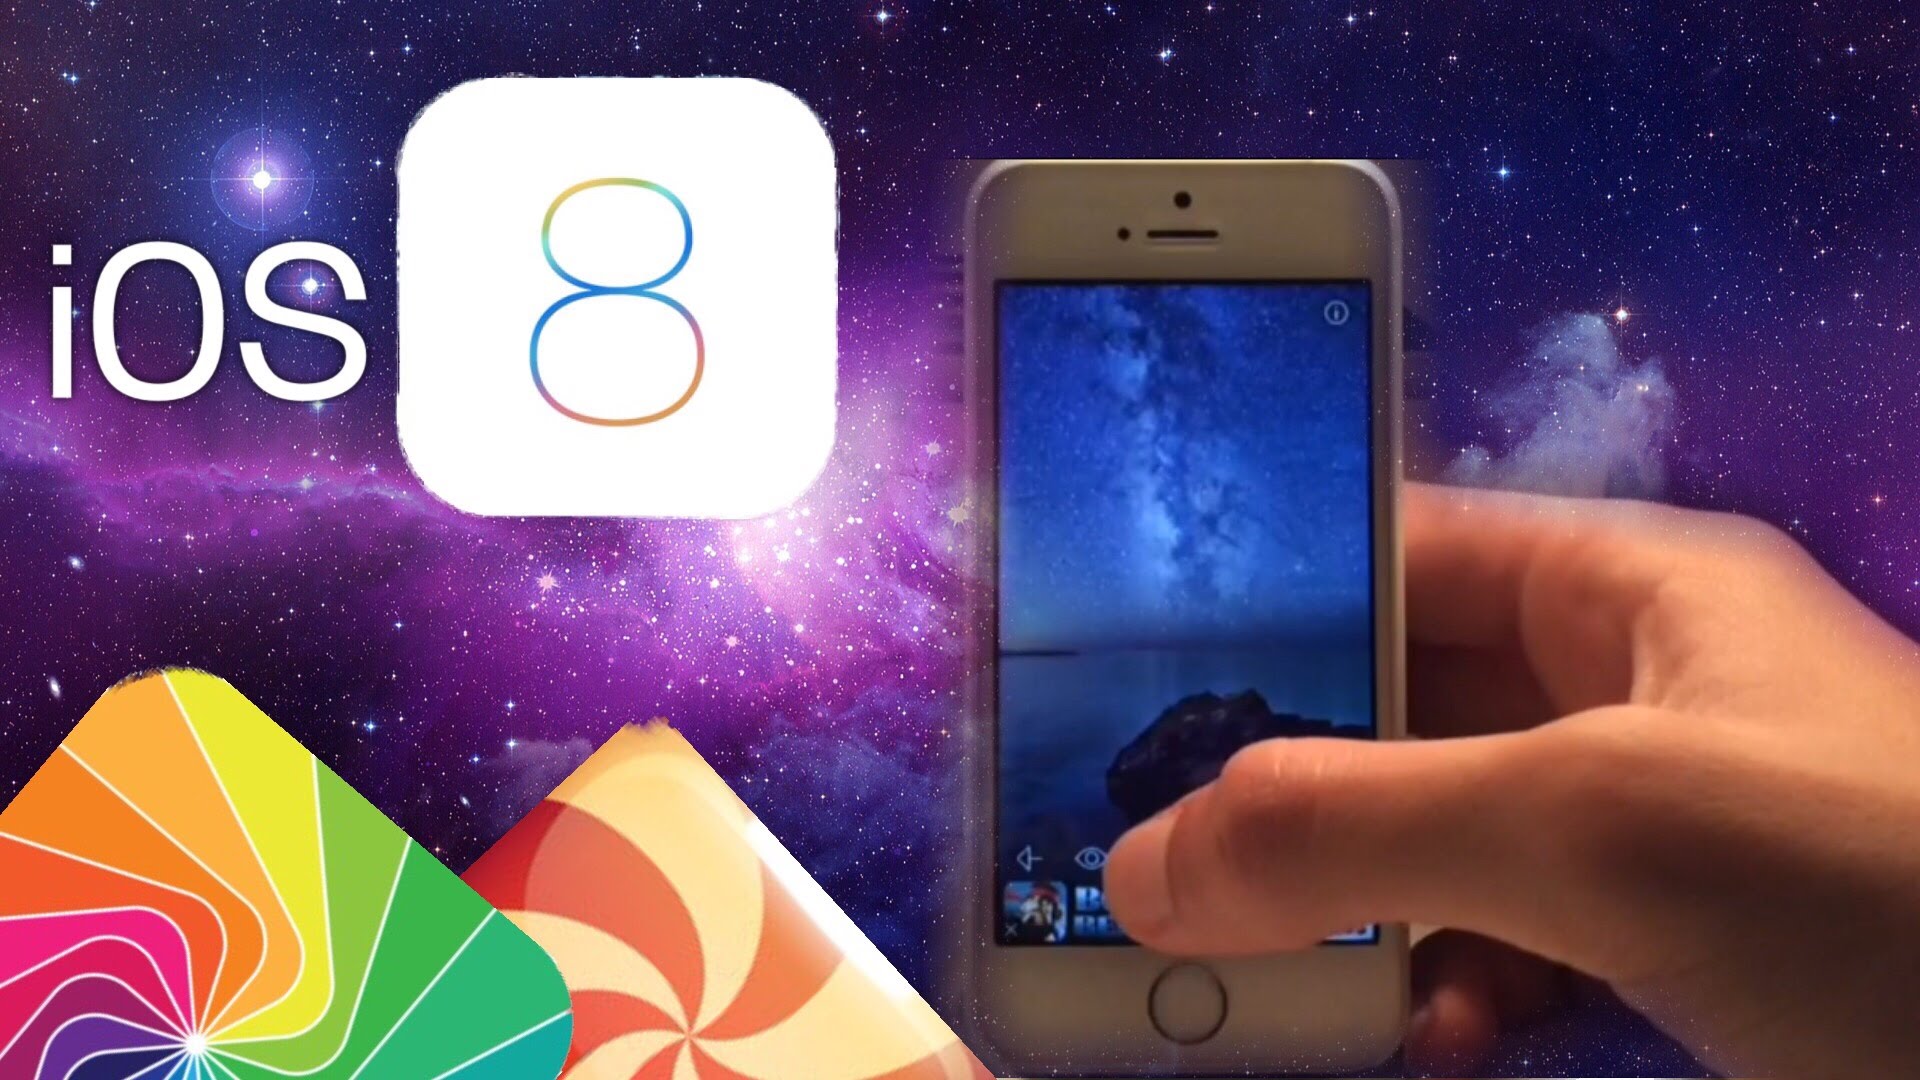 Best Free Wallpaper Apps For IOS 8 - YouTube